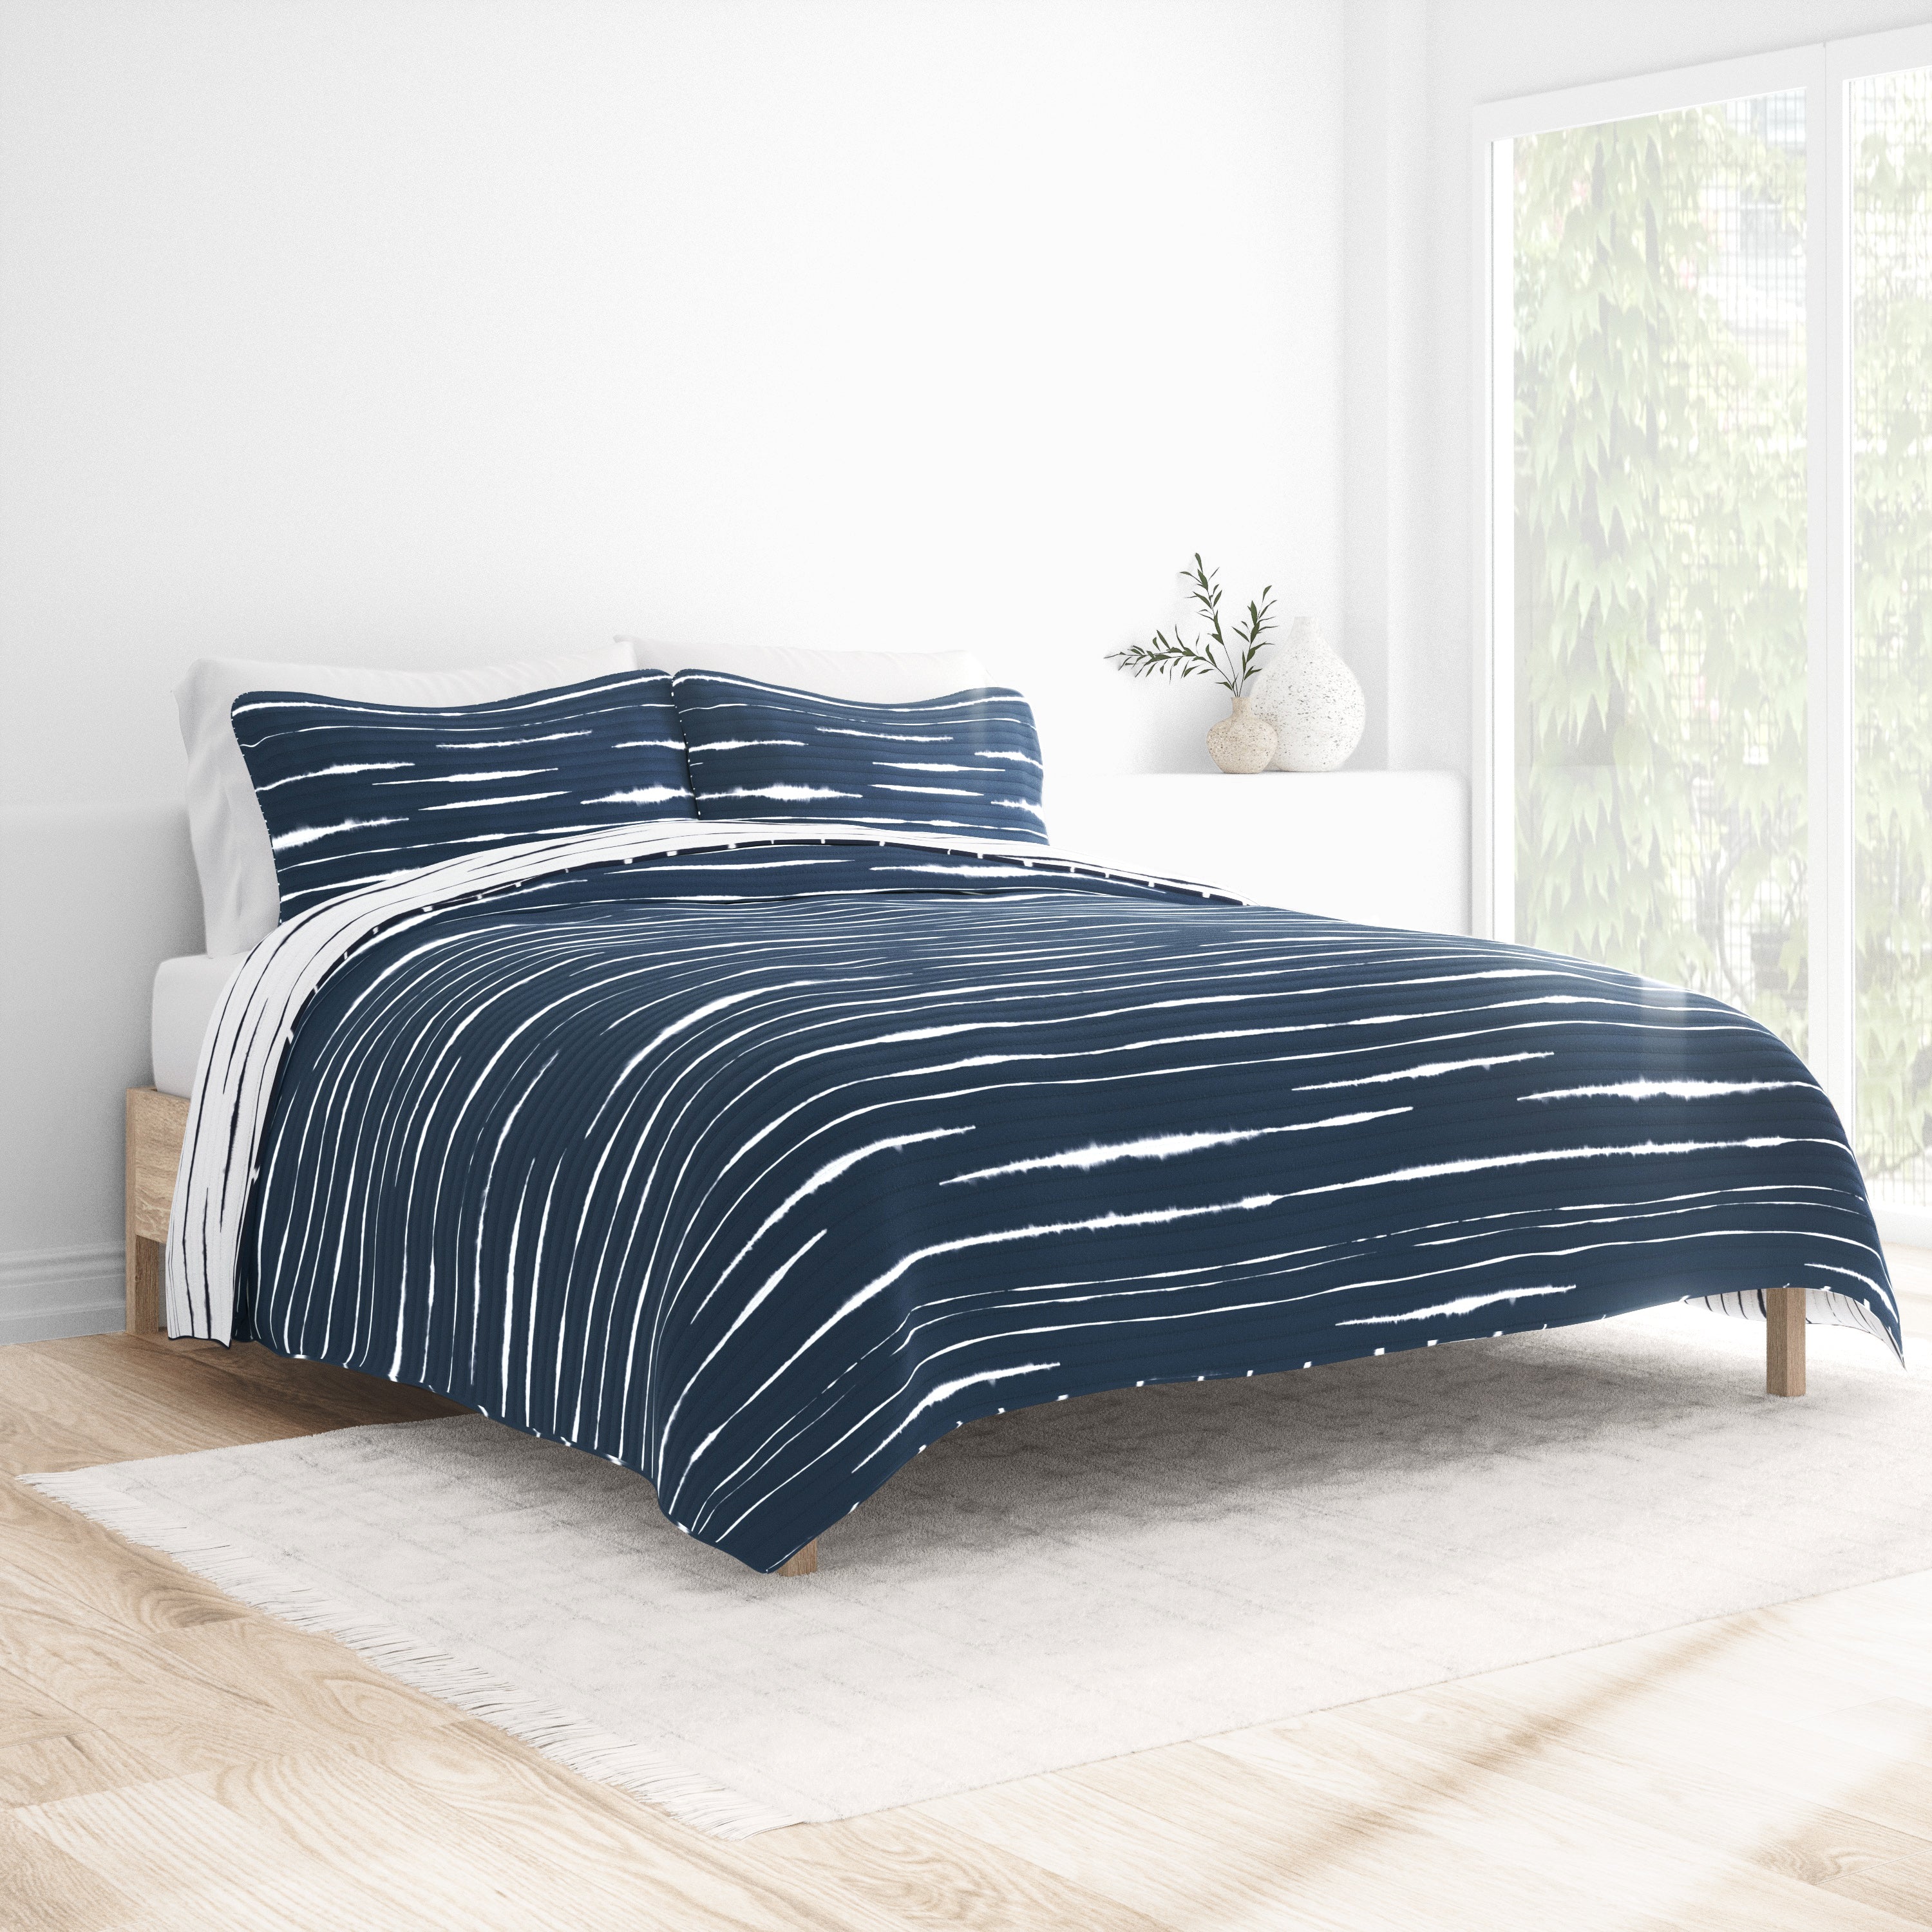 Buy Horizon Lines Reversible Quilted Coverlet Set (King/Cal King), (Navy) |  LINENS & HUTCH